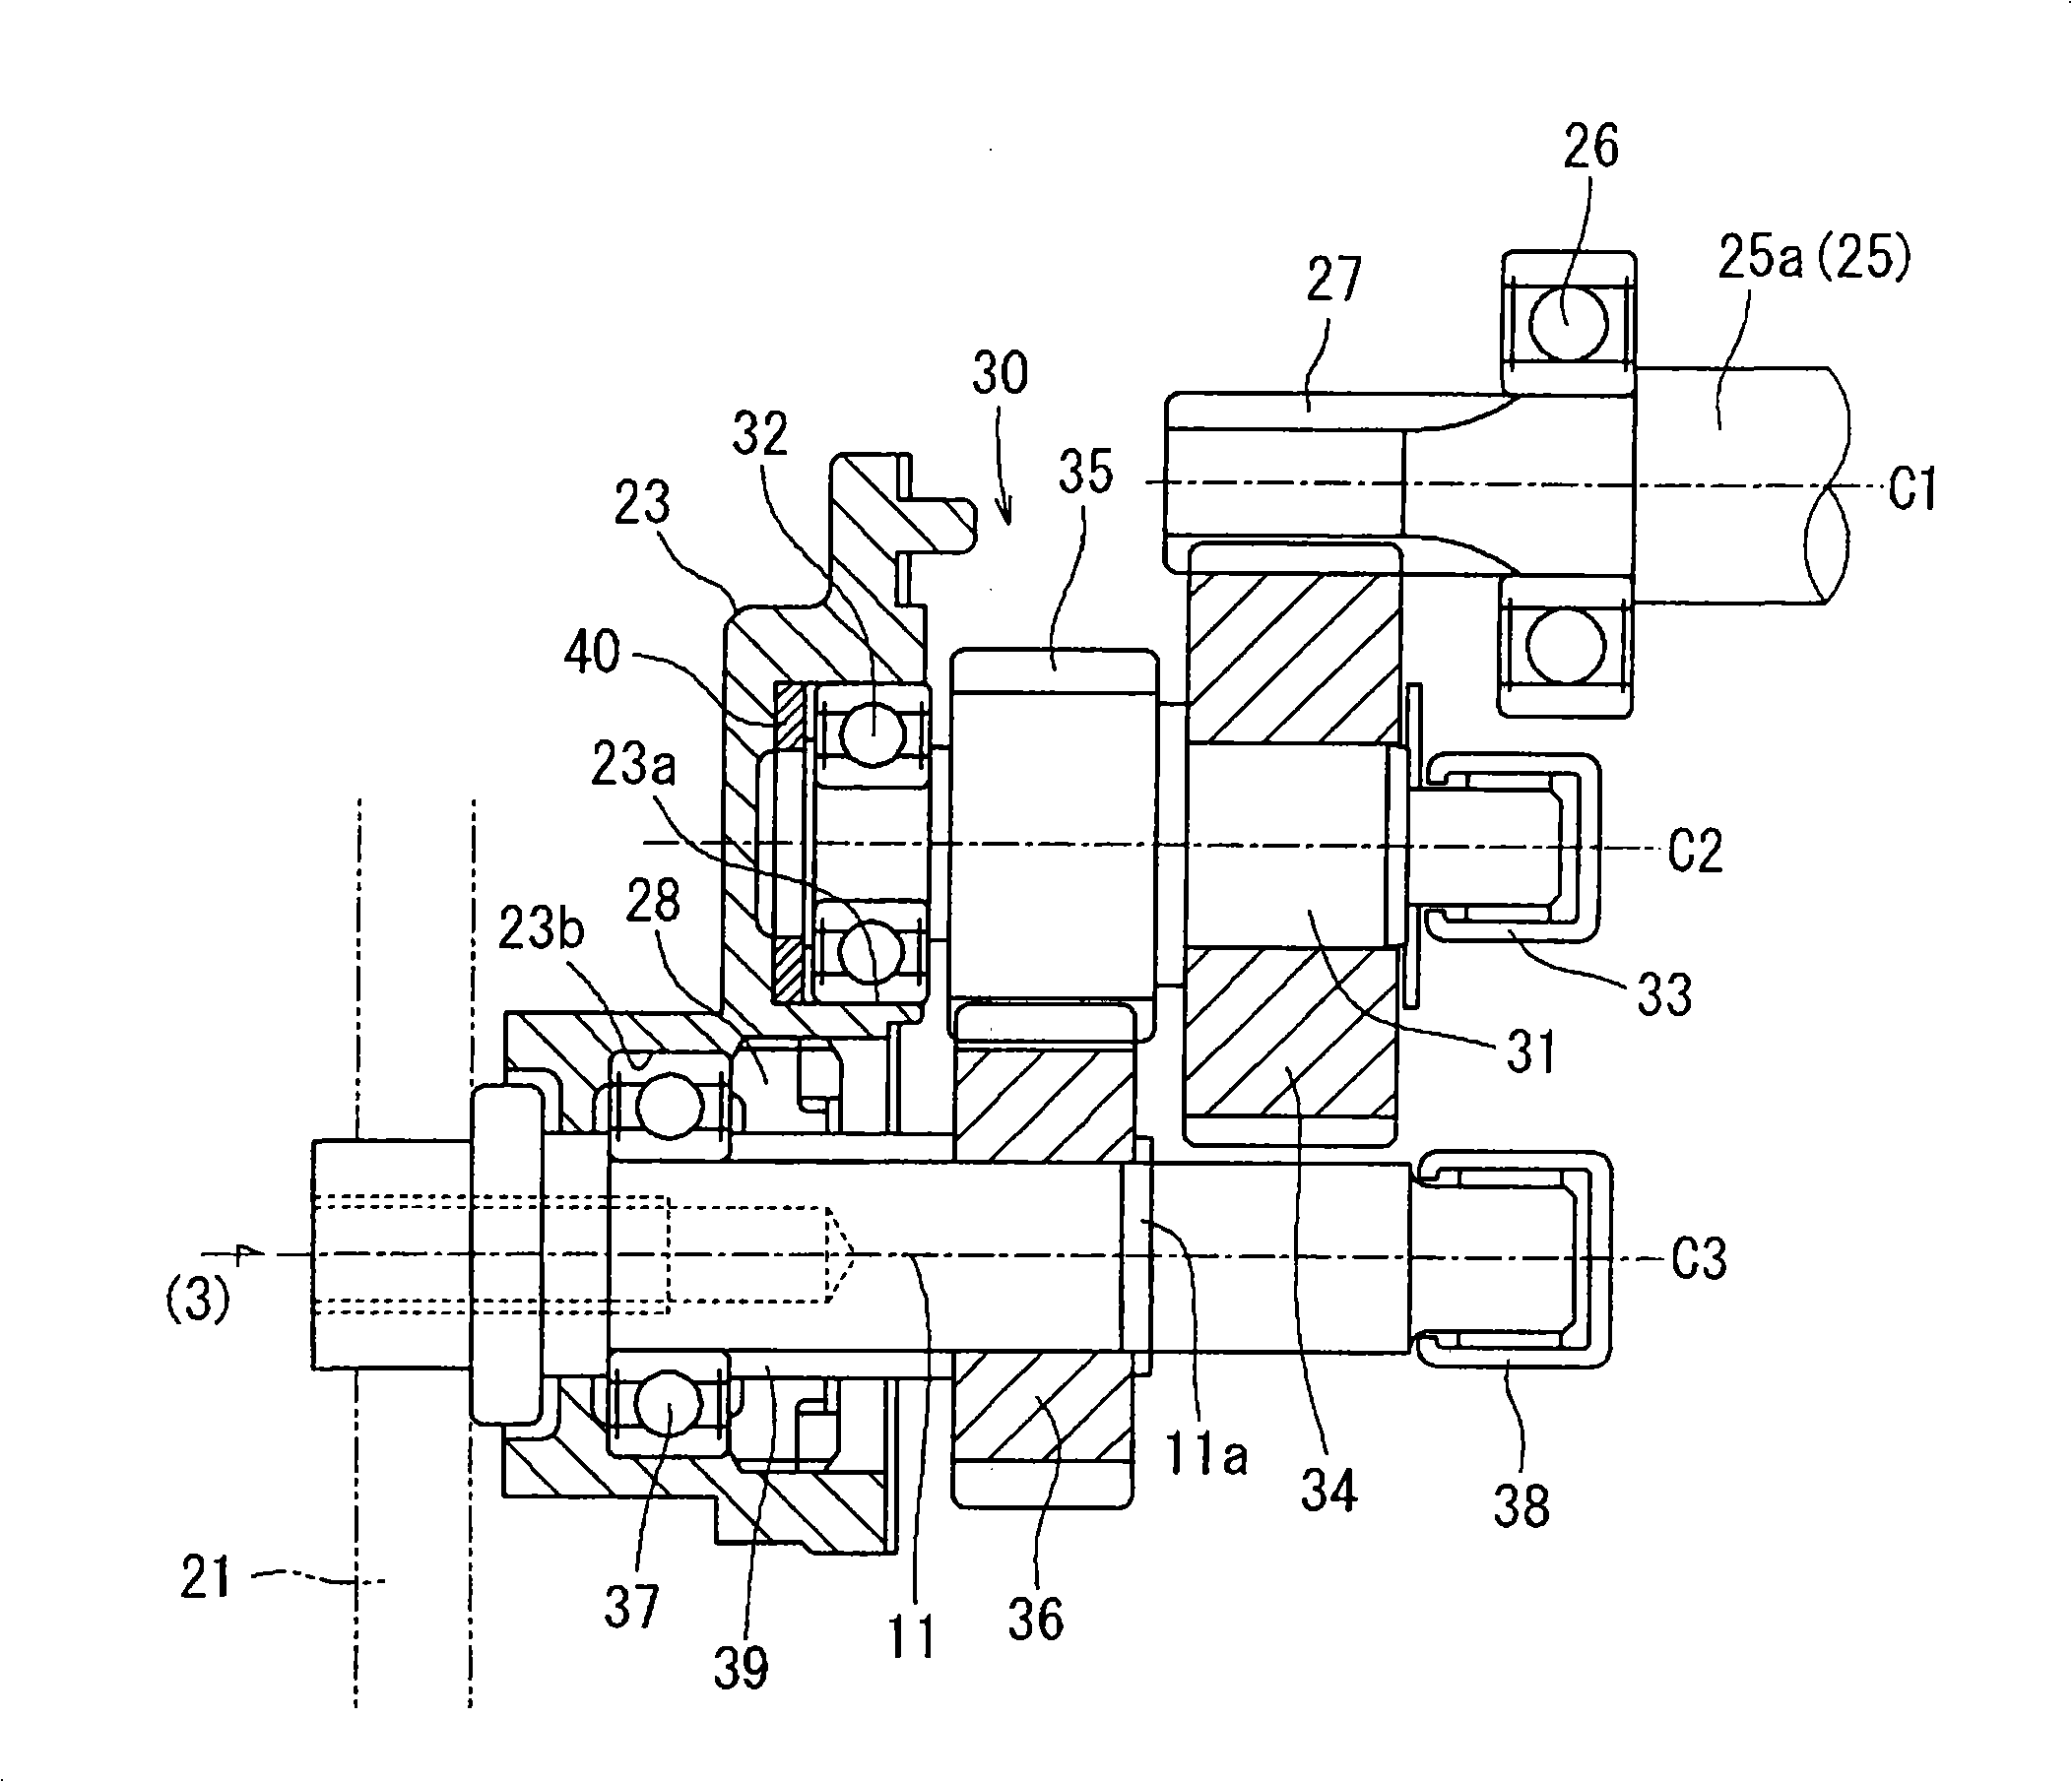 Speed-down mechanism of electric tool